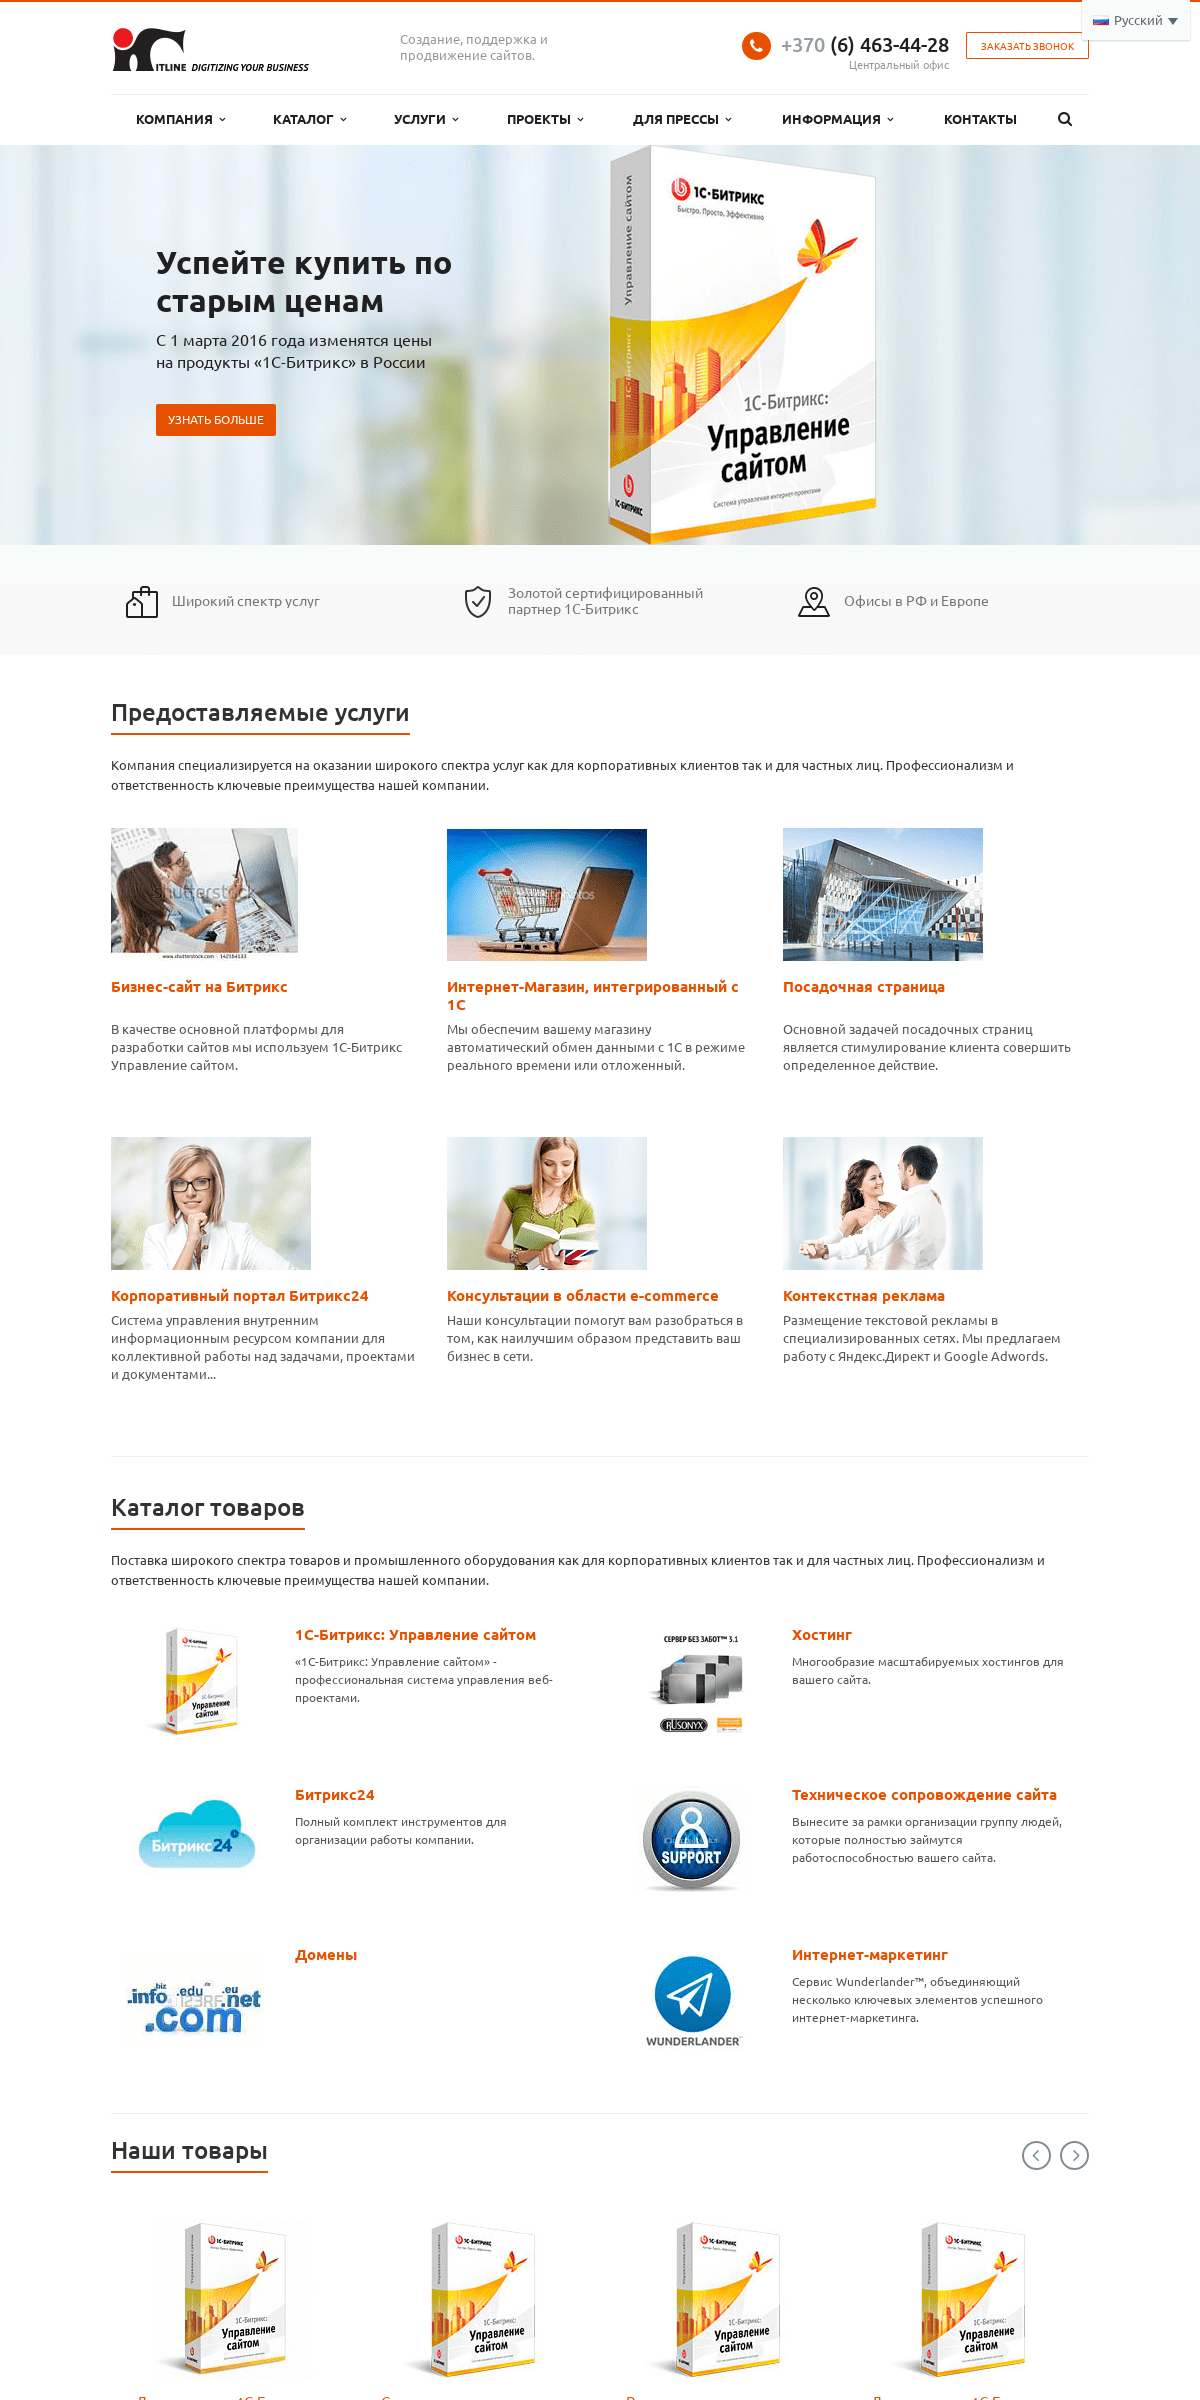 A complete backup of itlinesolutions.com